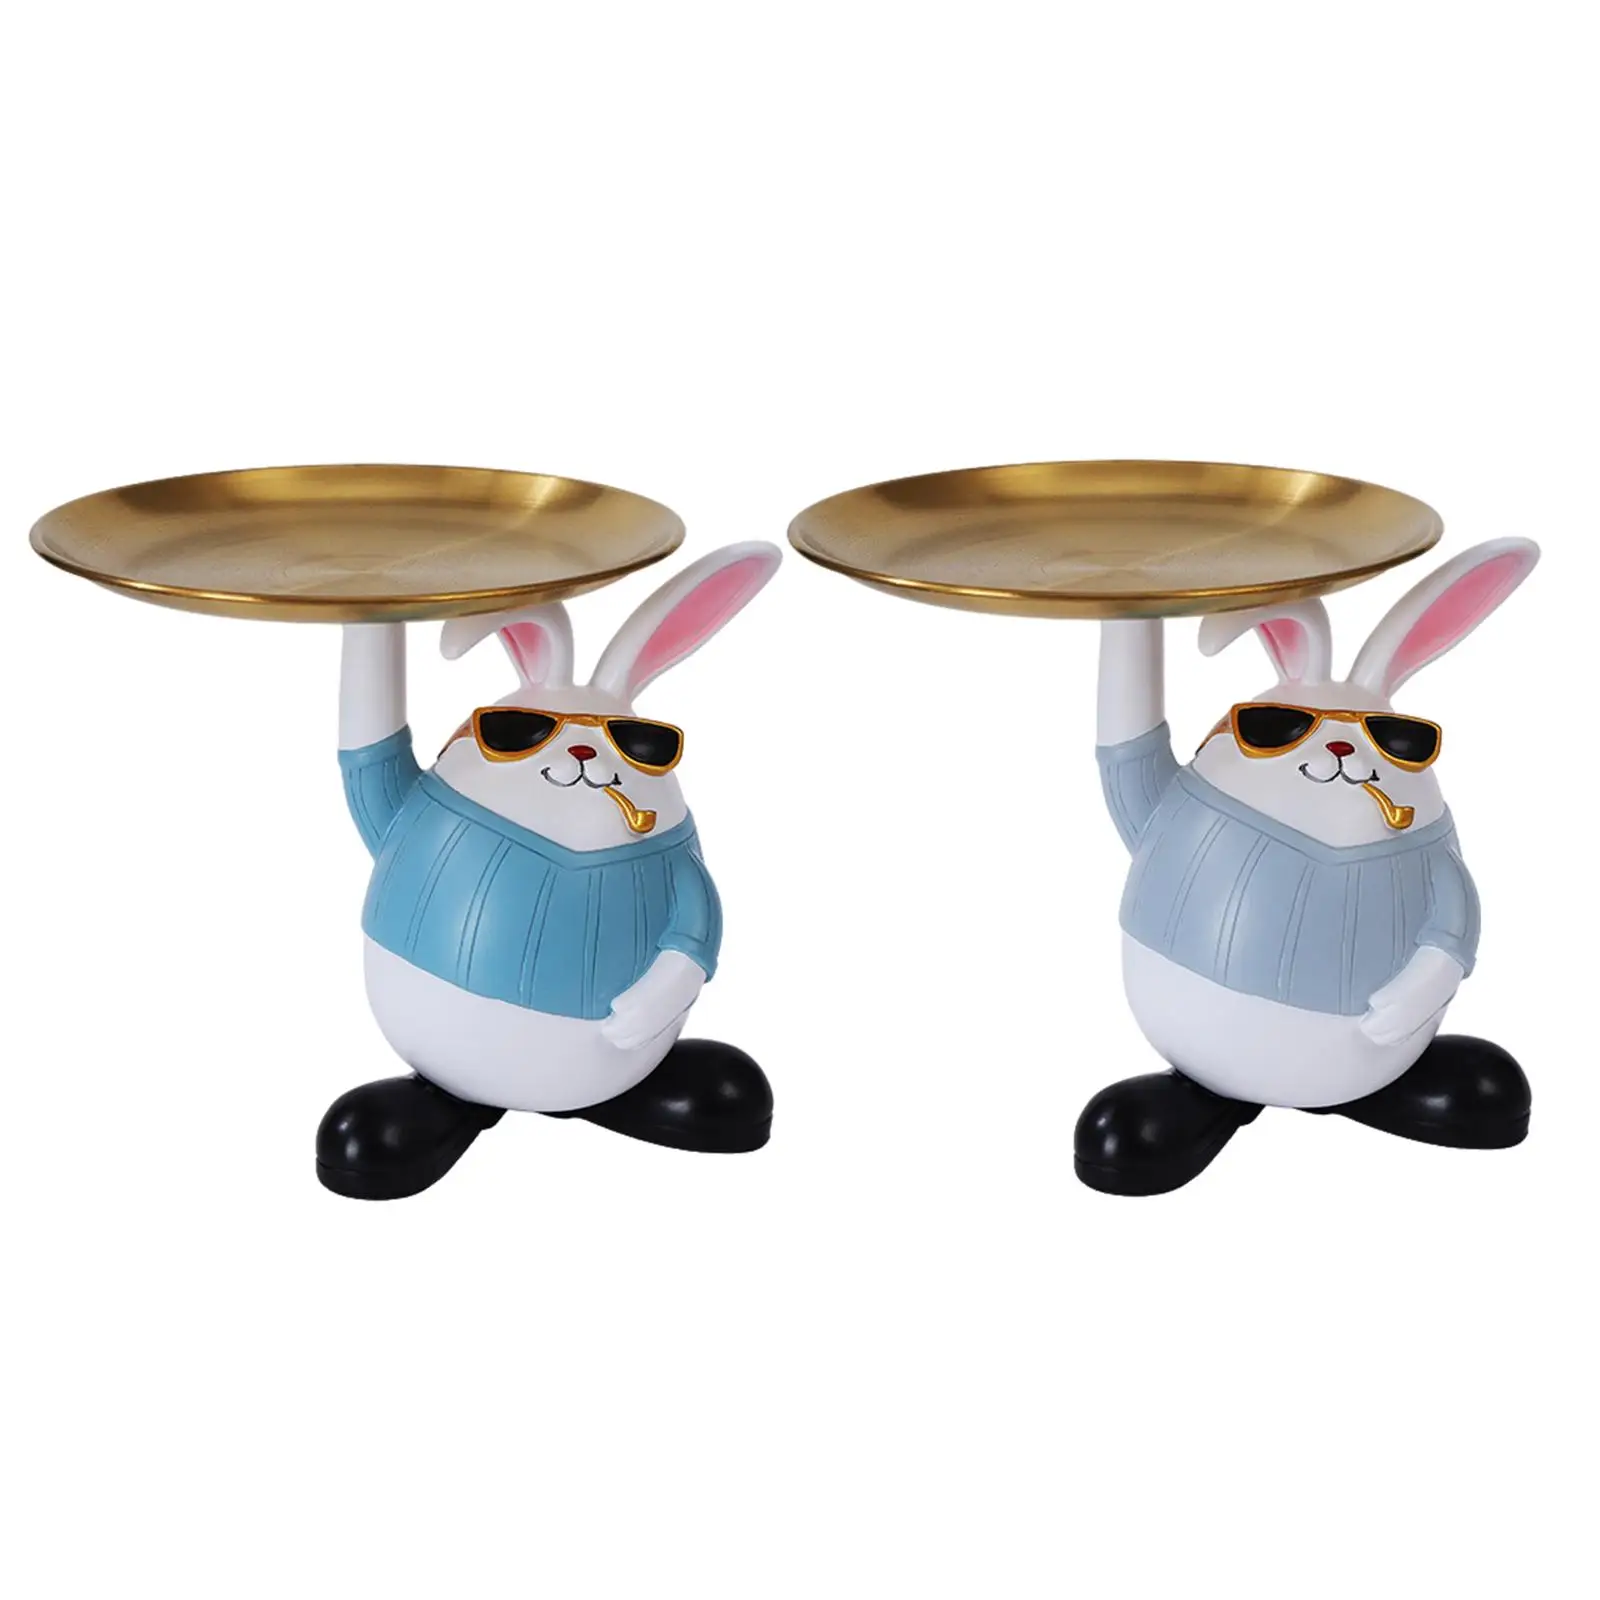 Creative Rabbit Storage Tray, Earrings Holder Jewelry Ring Tray Bunny Figurine Storage Box for Table Bar Home Party Decor